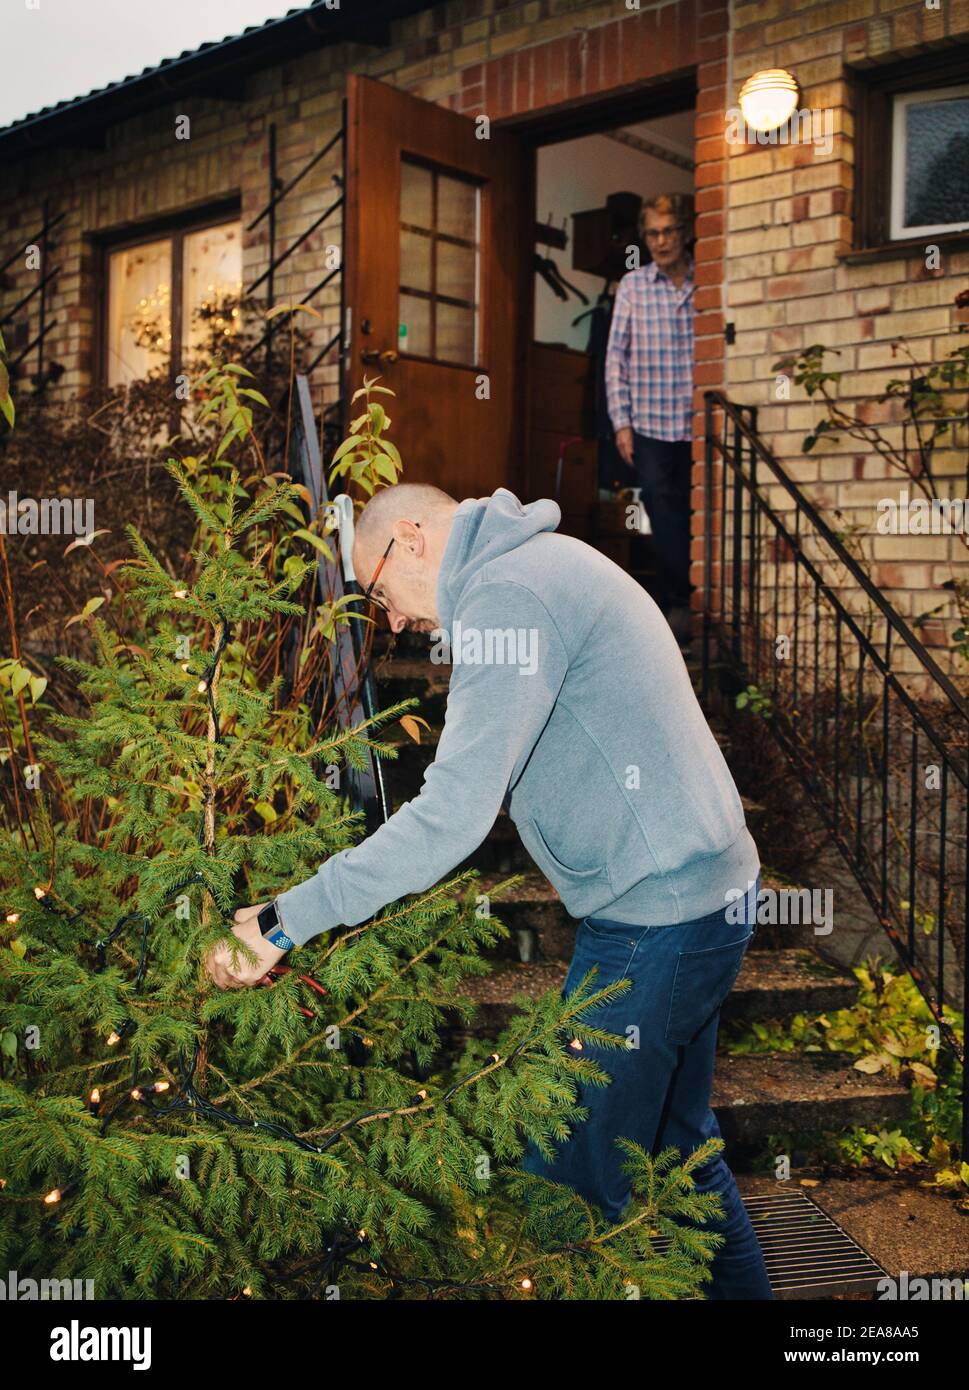 Middle aged man putting fairy lights on outdoor Christmas tree for elderly woman, Sweden. Concept of lifestlye, caring, celebration Stock Photo